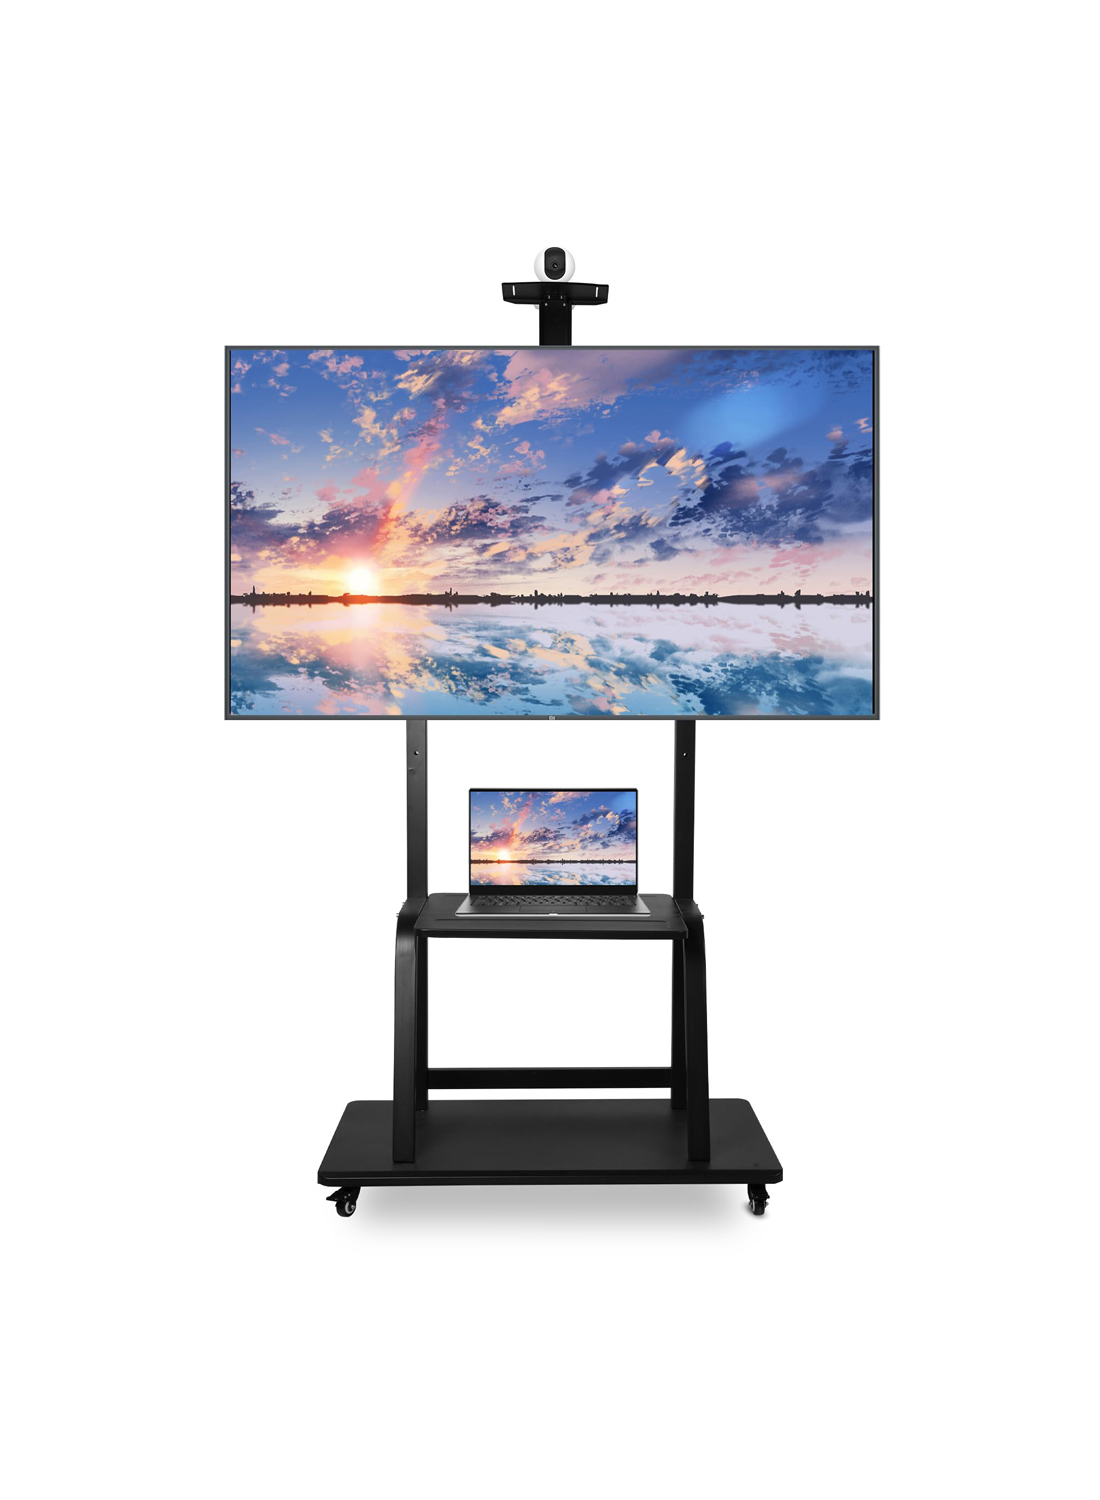 Mobile TV Stand with Projecter and Laptop Shelf for 32-75 Inch Screens for Living Room, Bedroom and Office, Holds up to 150 lbs